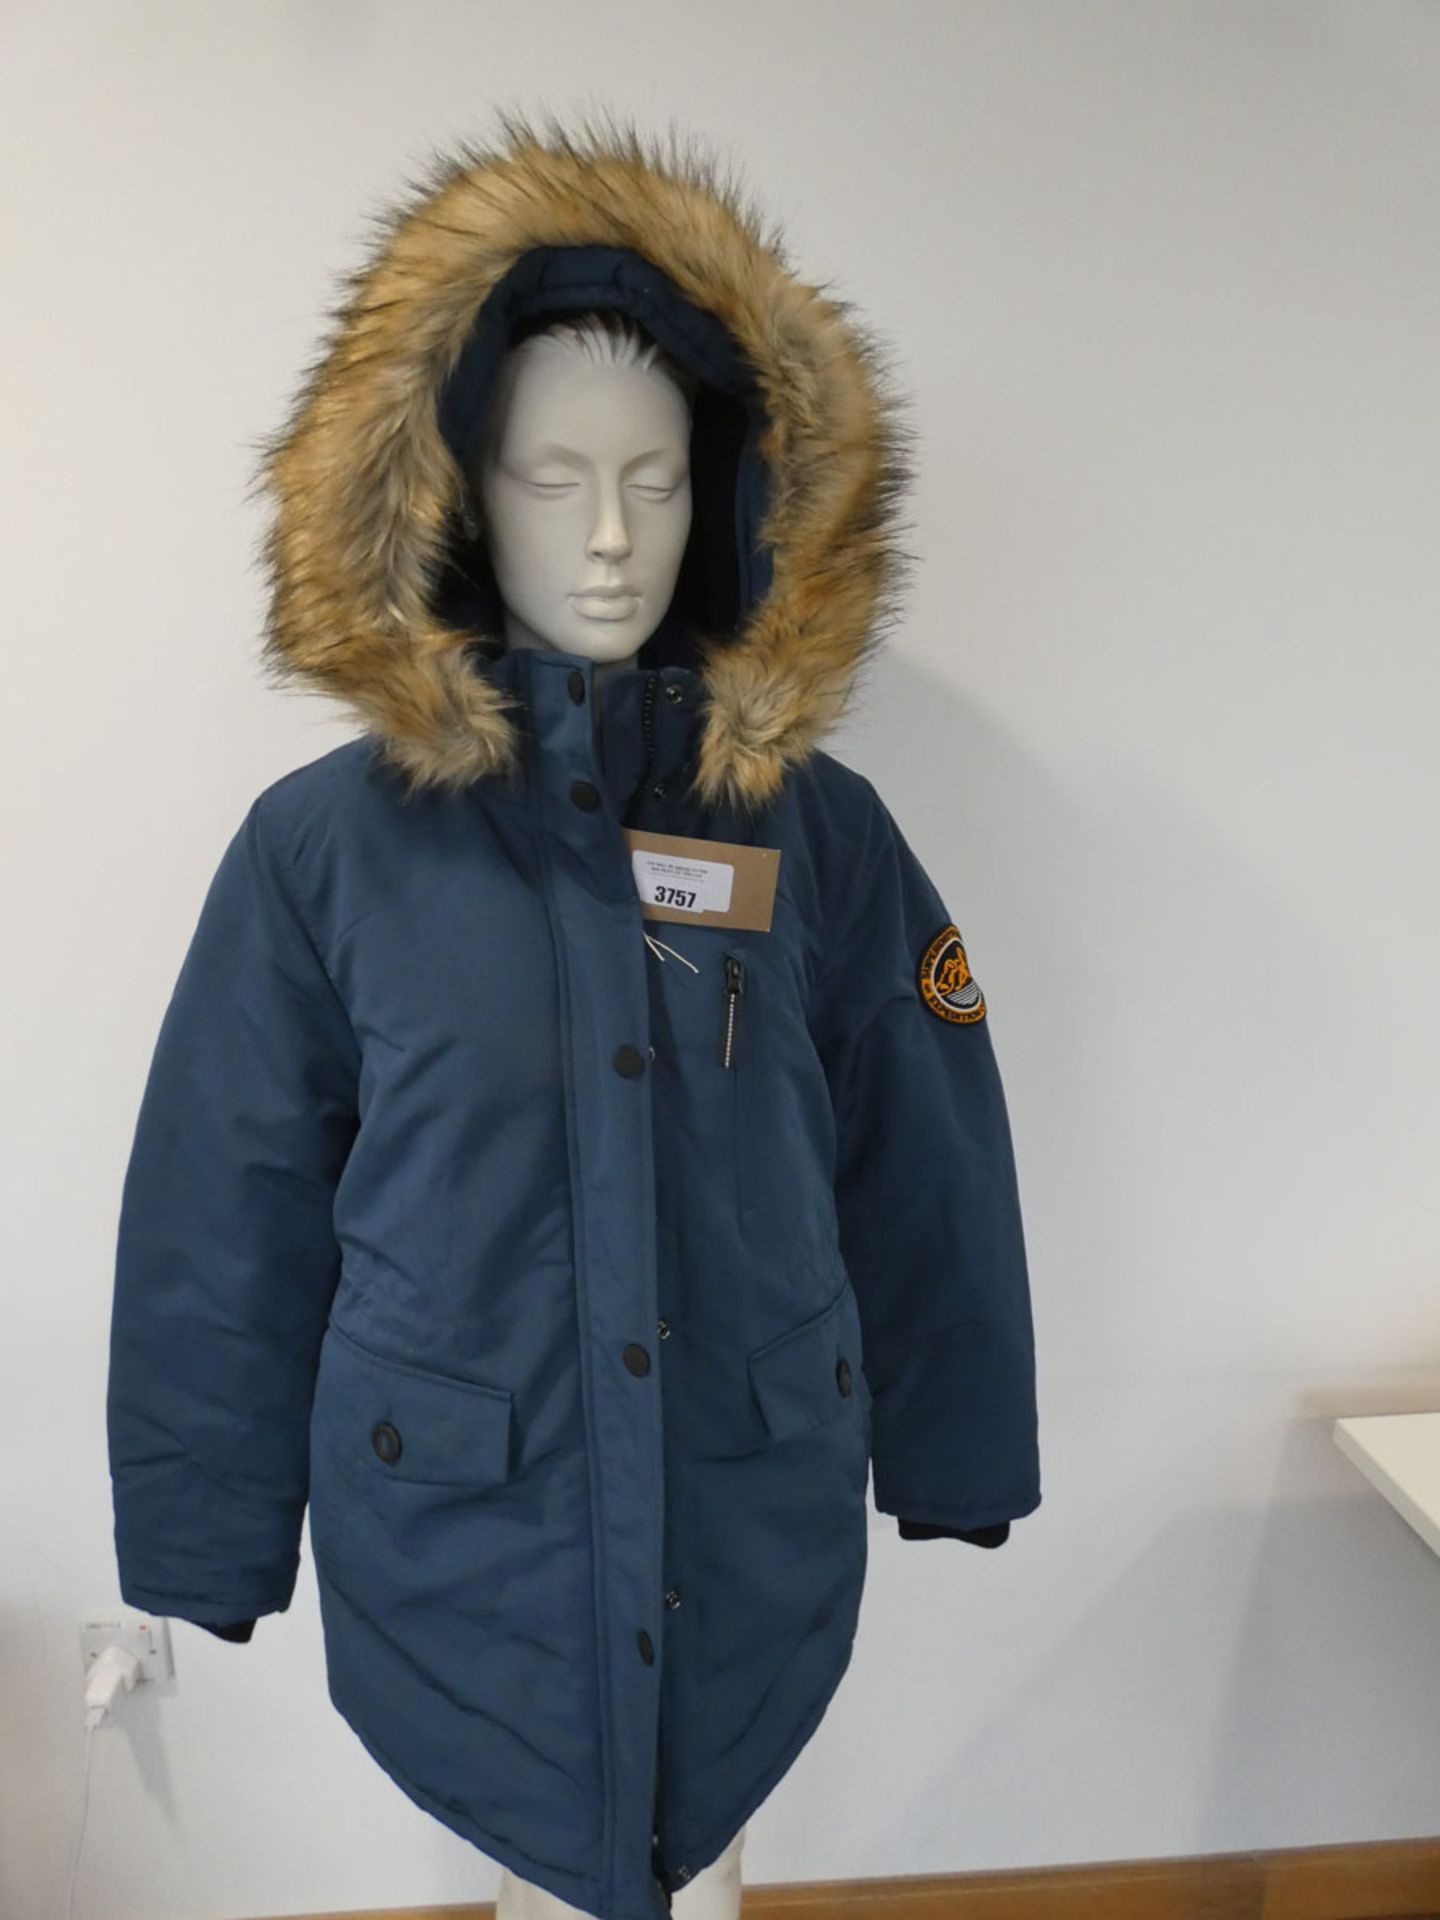 Superdry ladies everest parka in ocean blue size 16 (Mannequin not included)